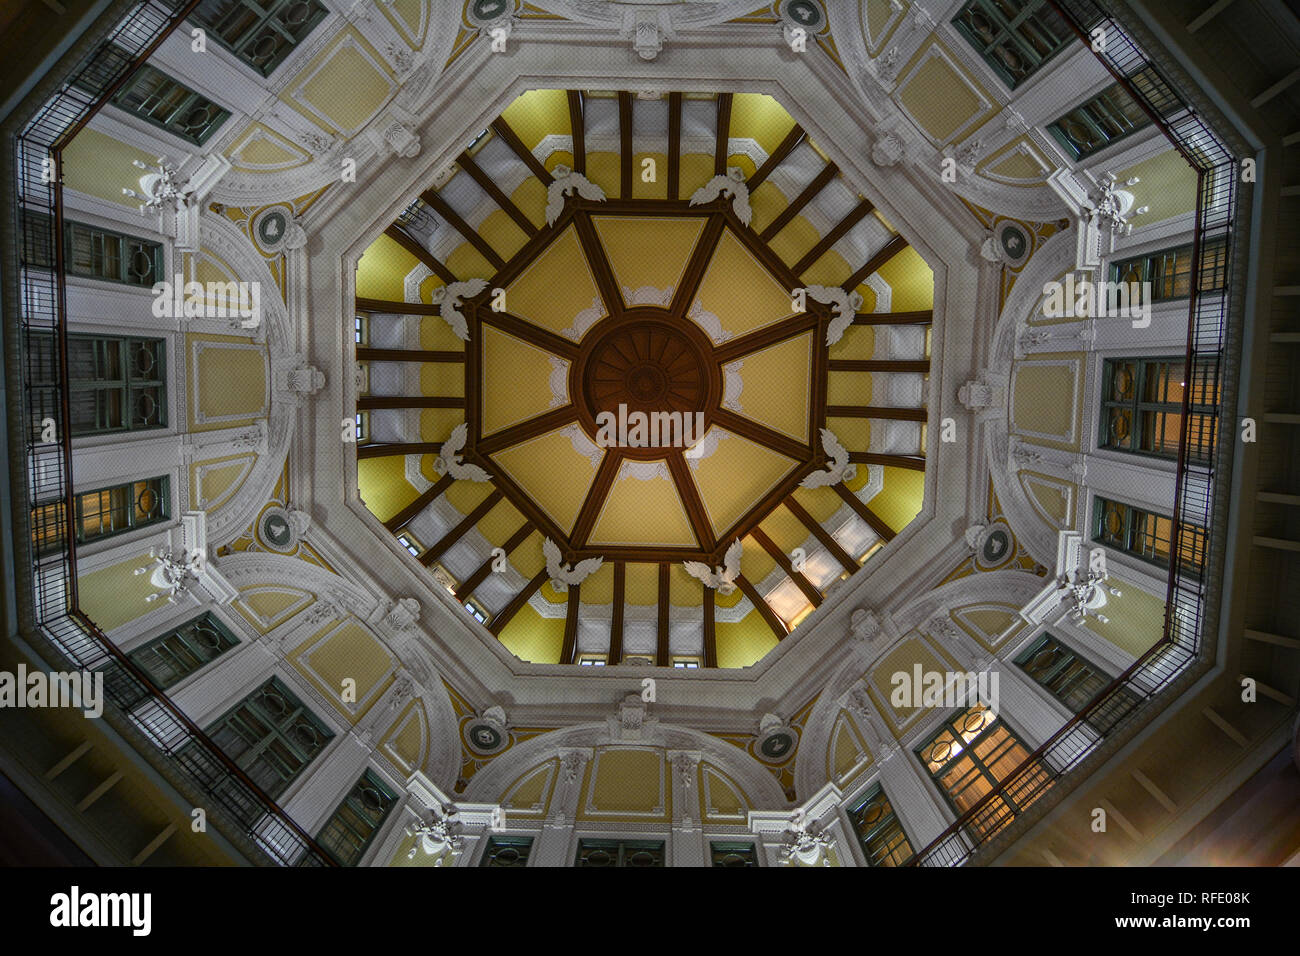 Tokyo, Japan - Dec 31, 2015. Interior of Tokyo Station and one of the restored rooftop domes that was destroyed by B-29 firebombing in 1945. Stock Photo